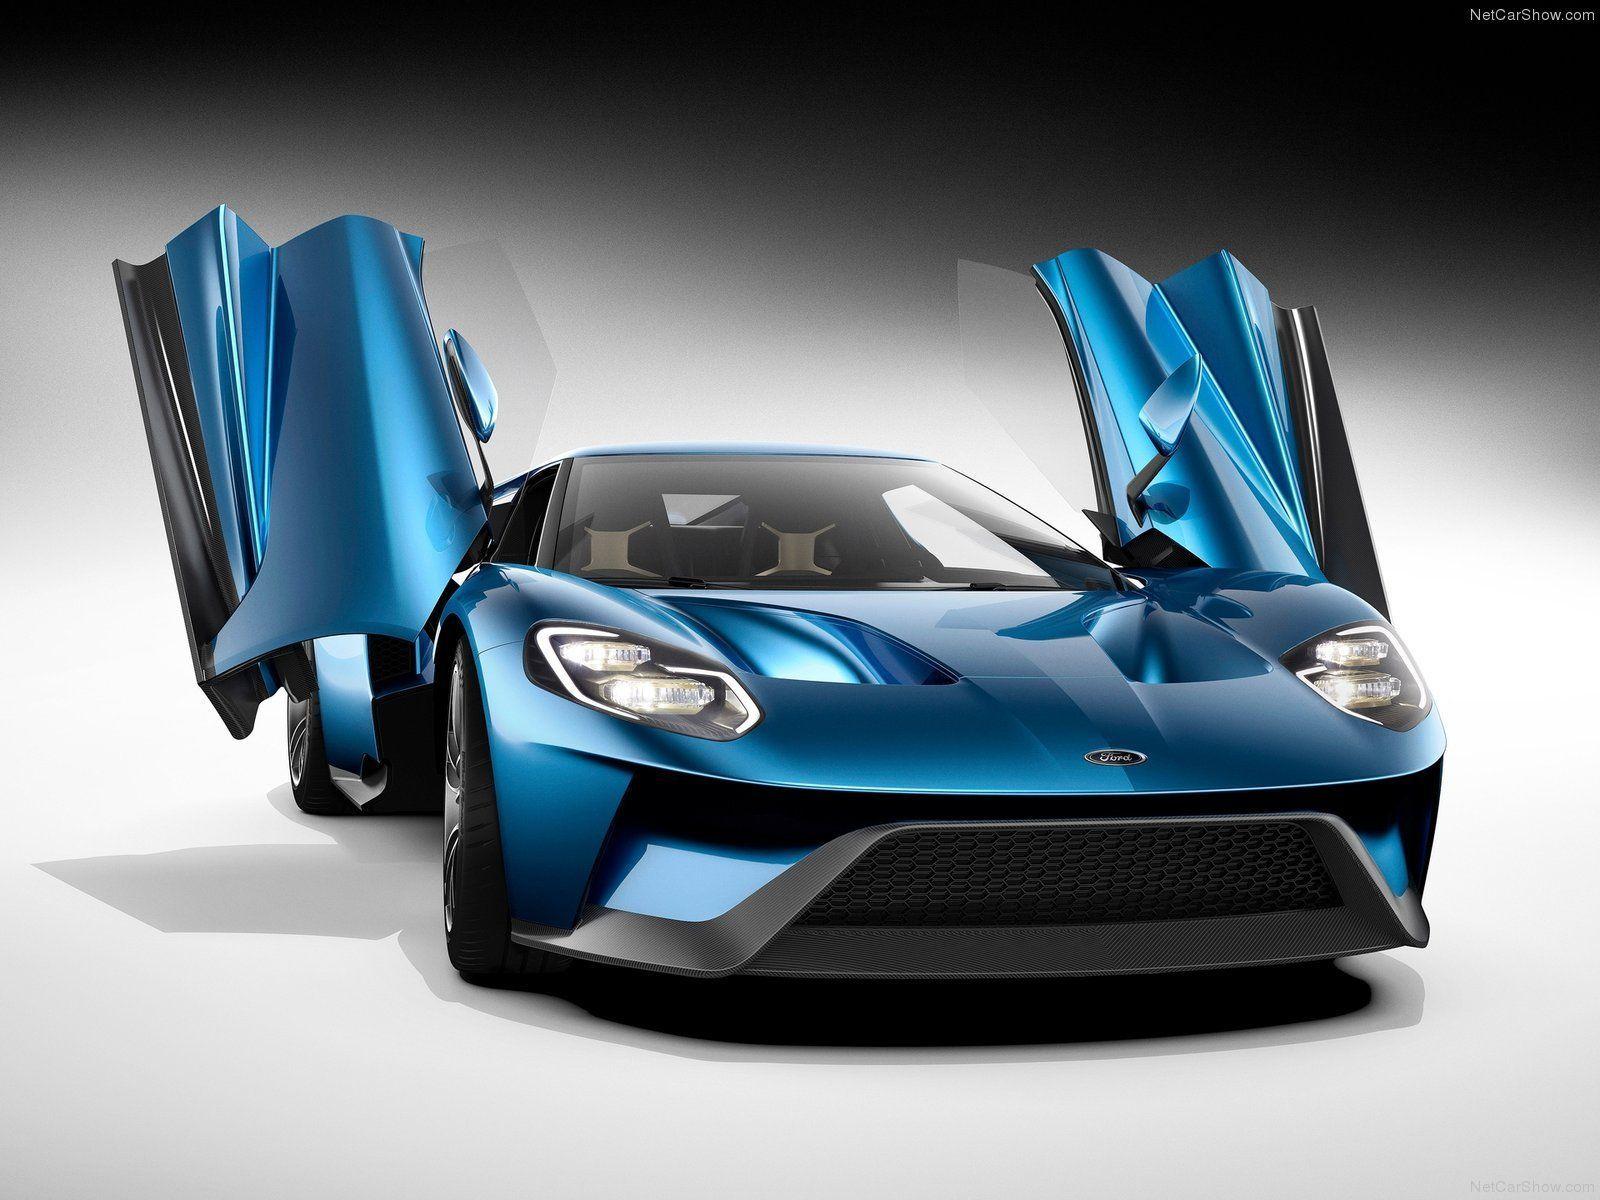 Ford GT, HD Wallpaper, Image, Picture, Pics